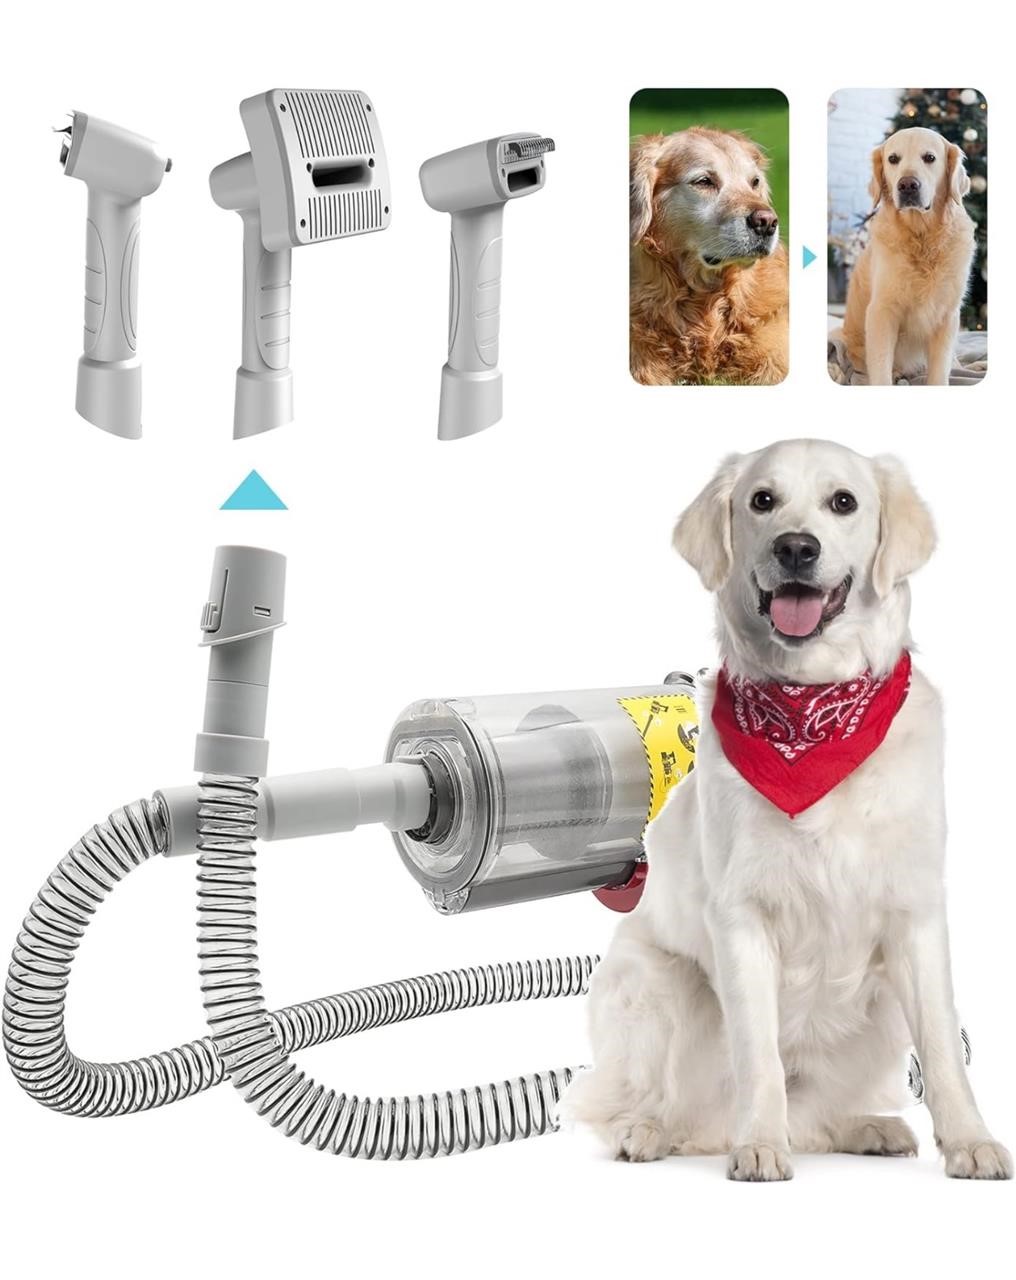 ($69) Self-Cleaning Pet Grooming and Shedding